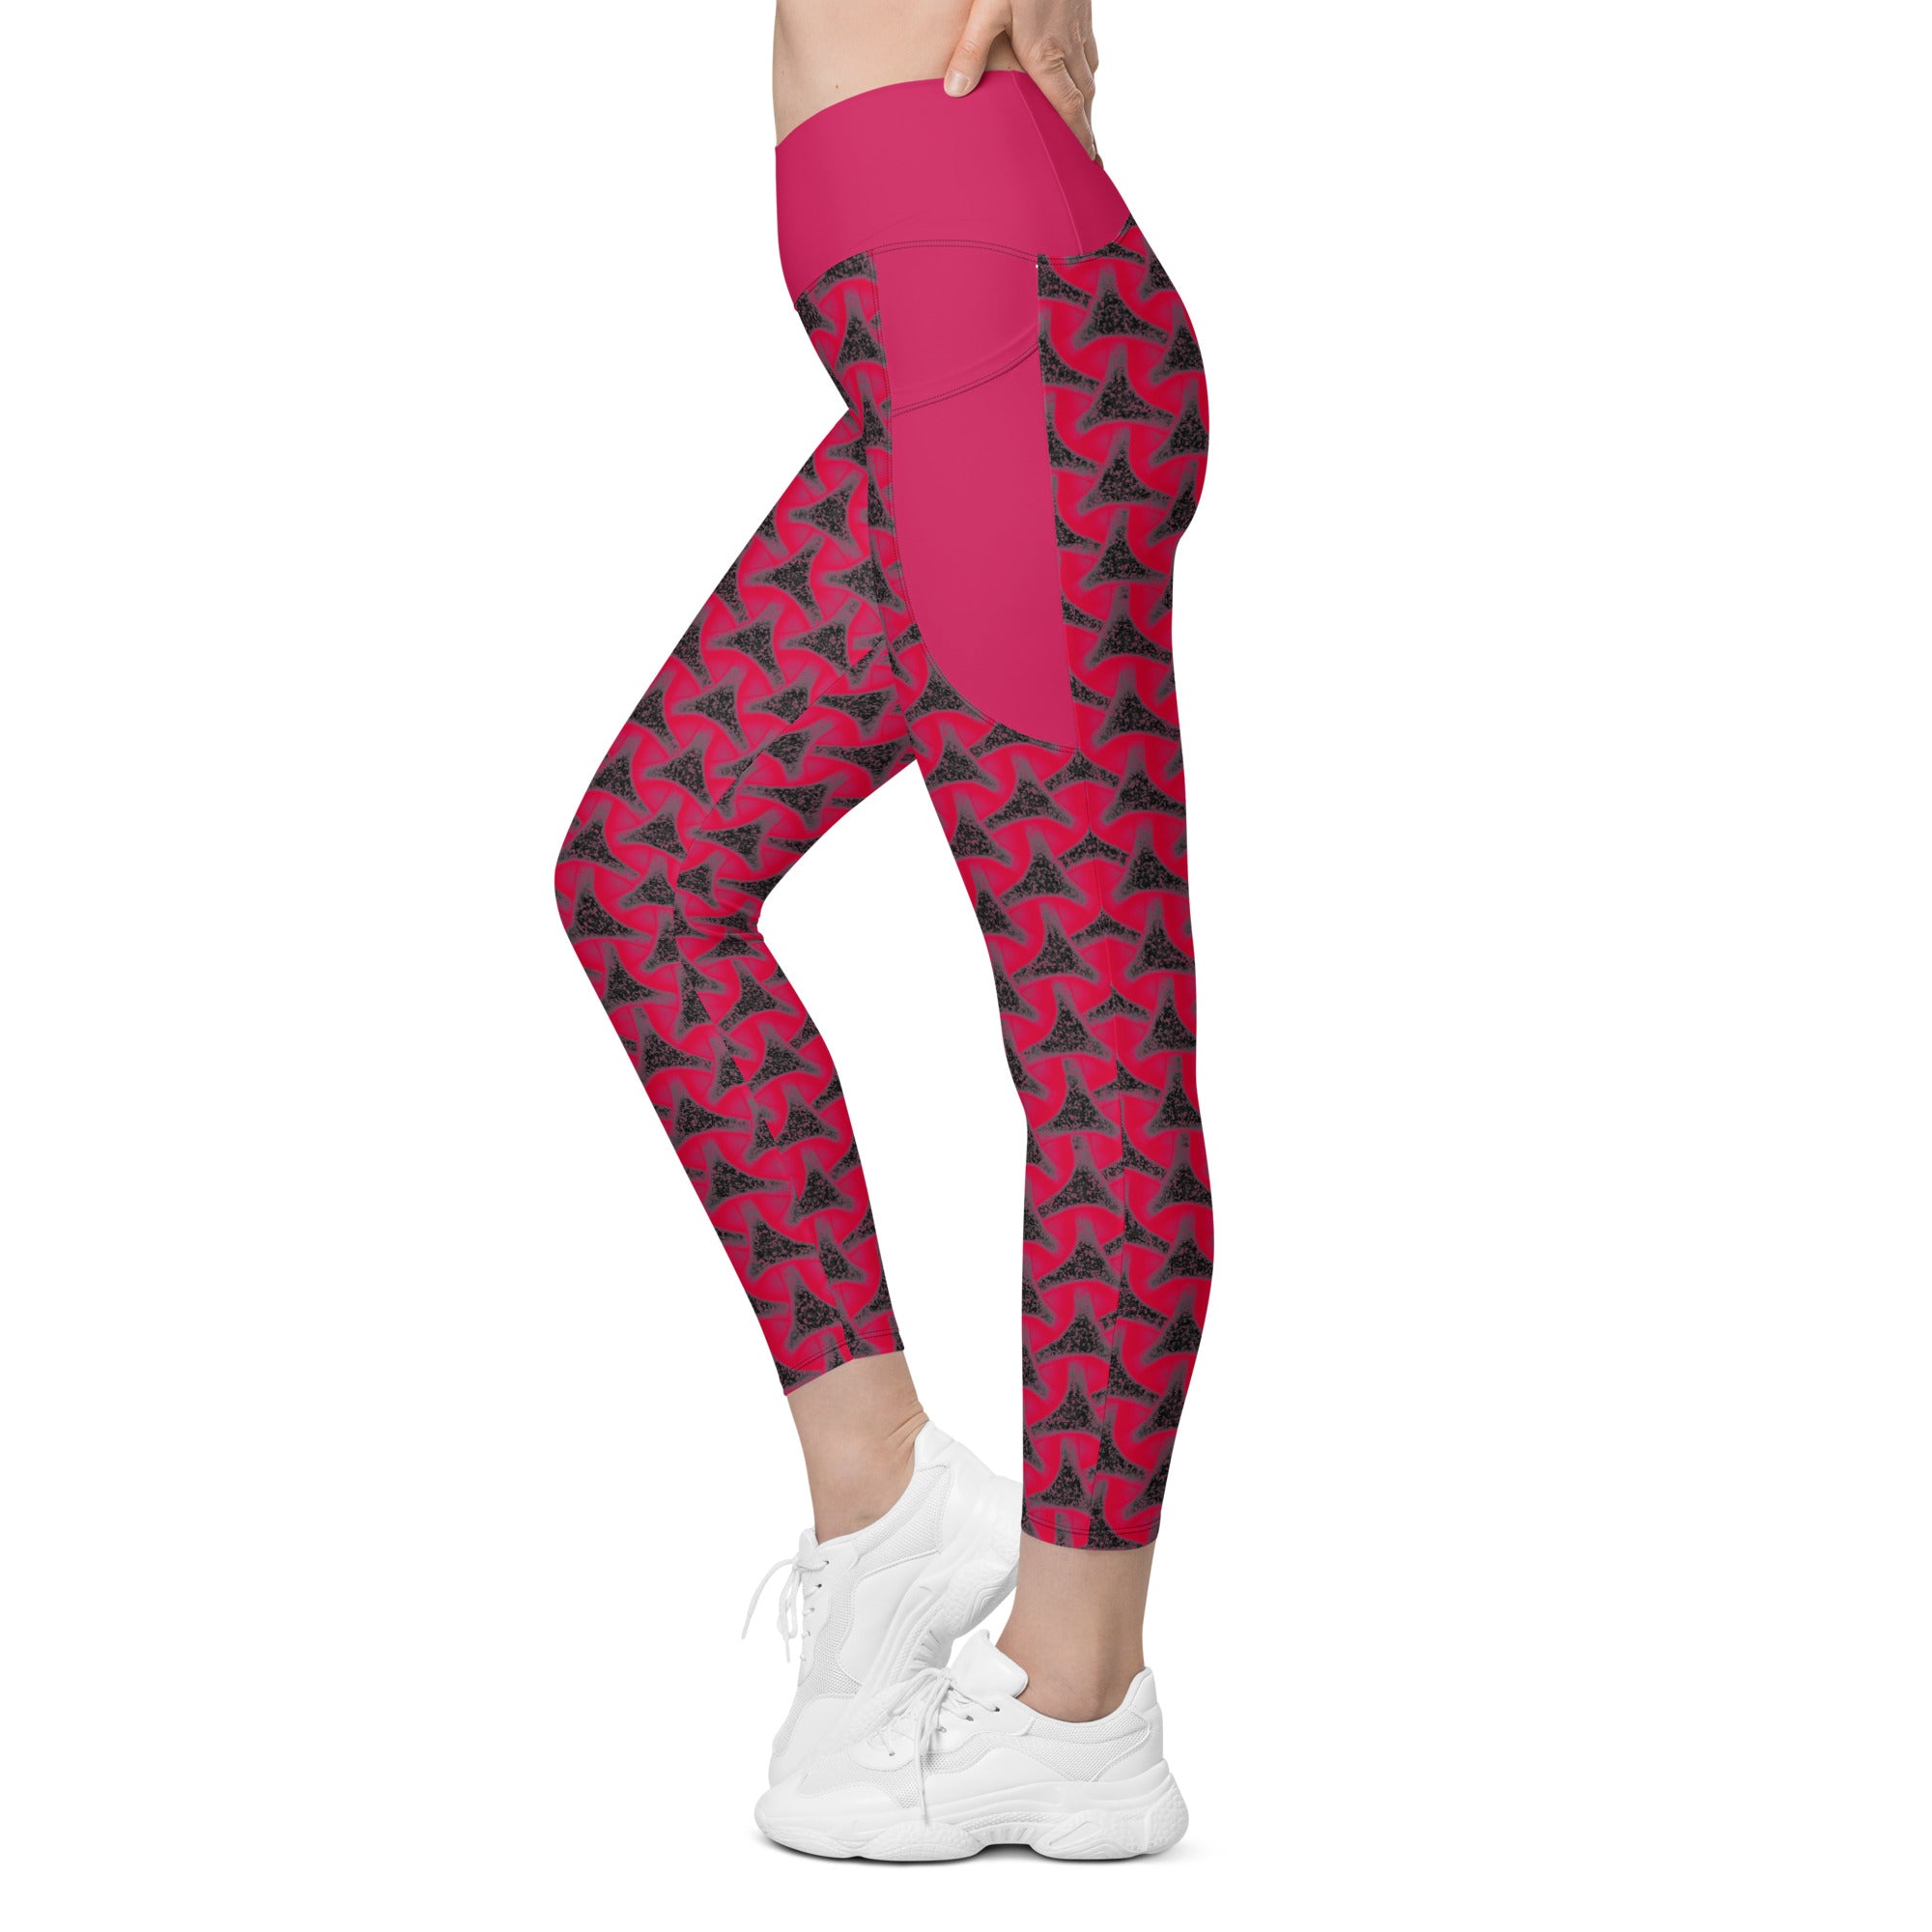 Stellar Shift Tristar Leggings paired with running shoes for an active look.